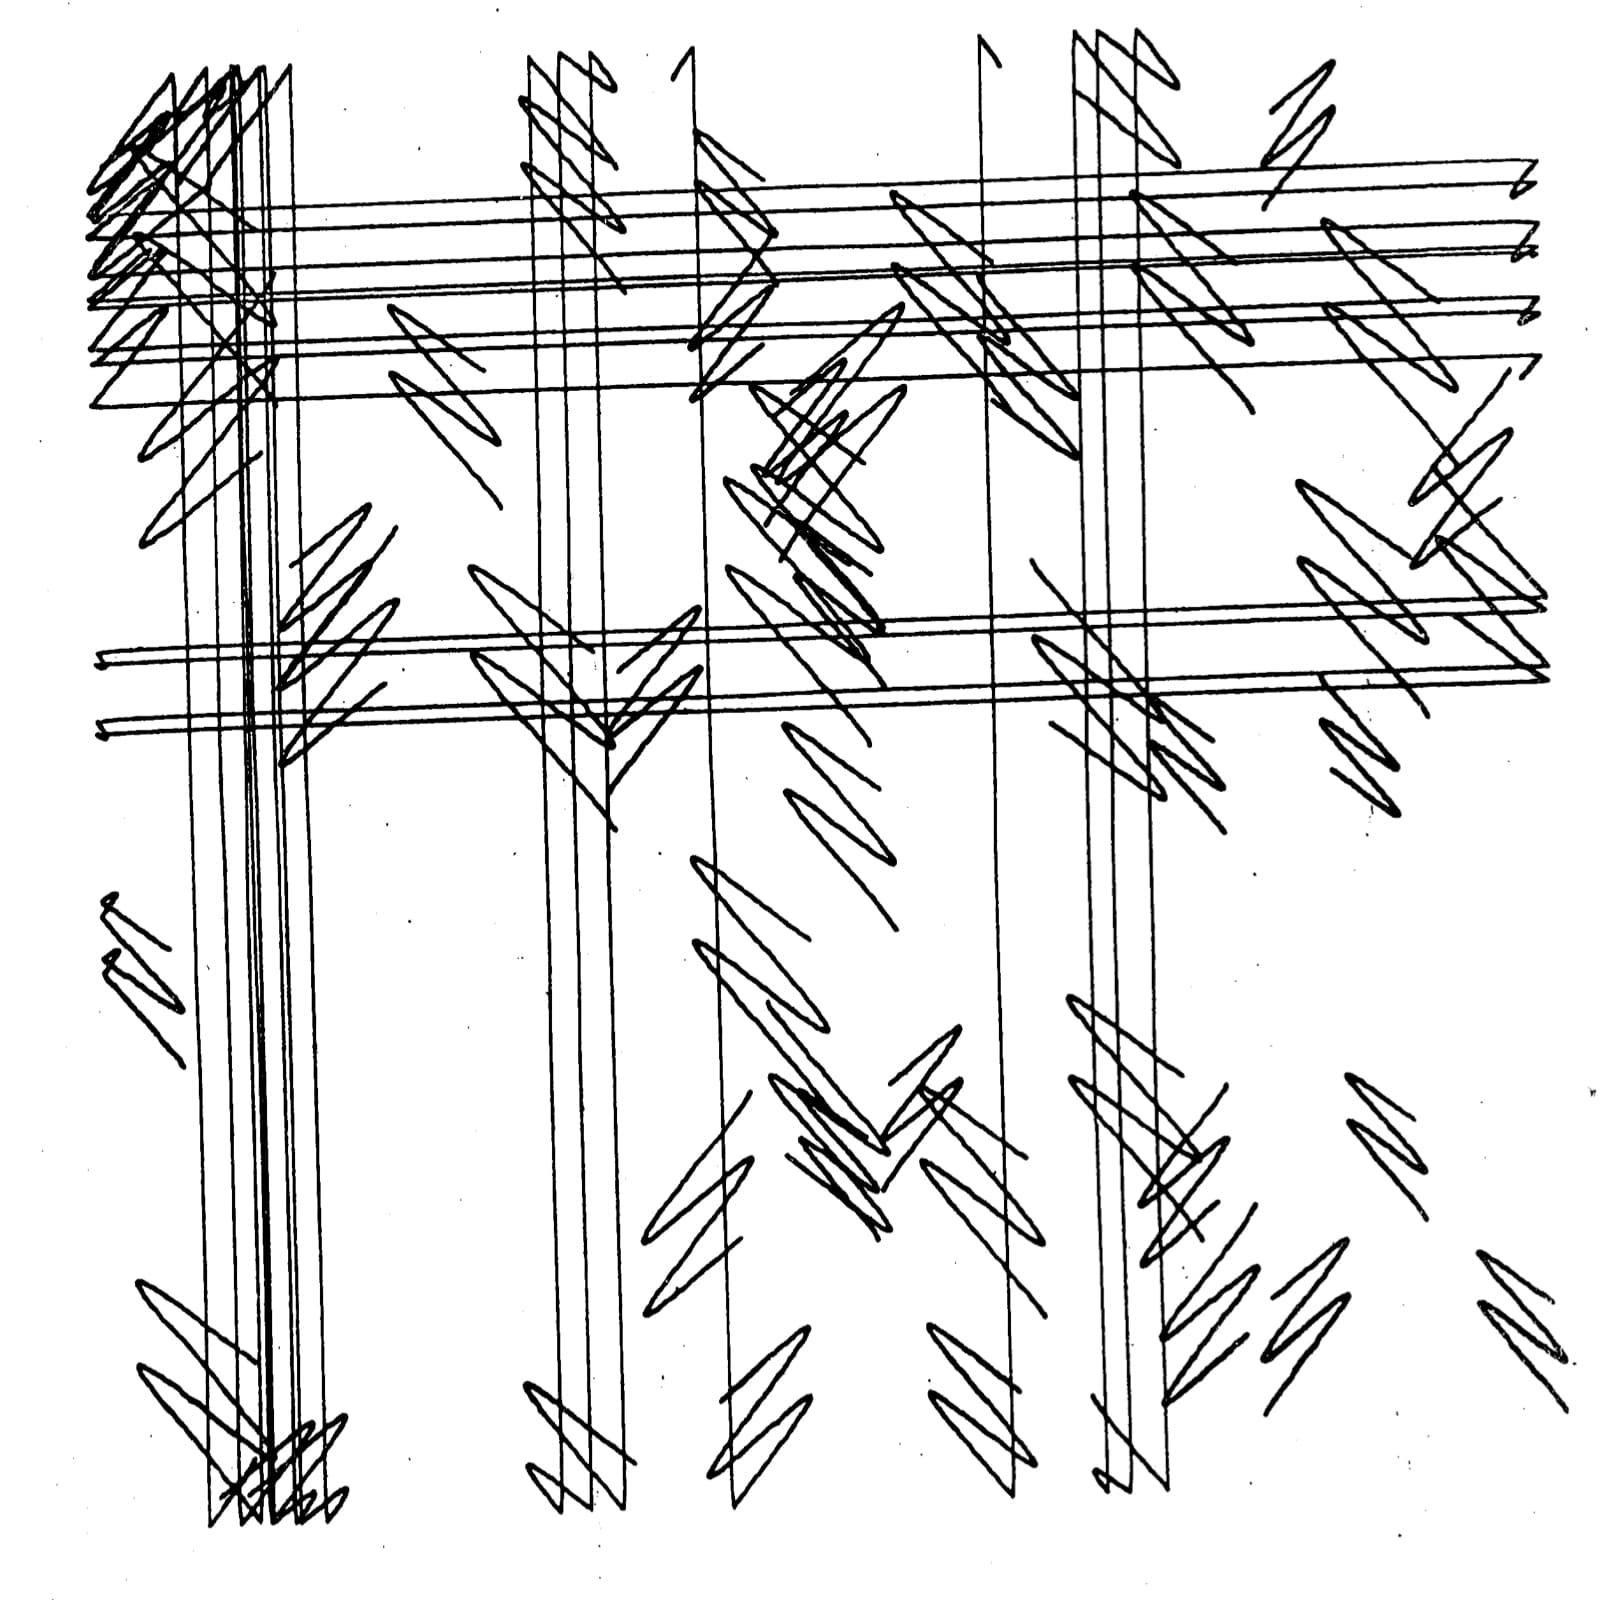 A series of horizontal and vertical lines make an off-centre grid. Sinusoidal-squiggles are sprinkled throughout